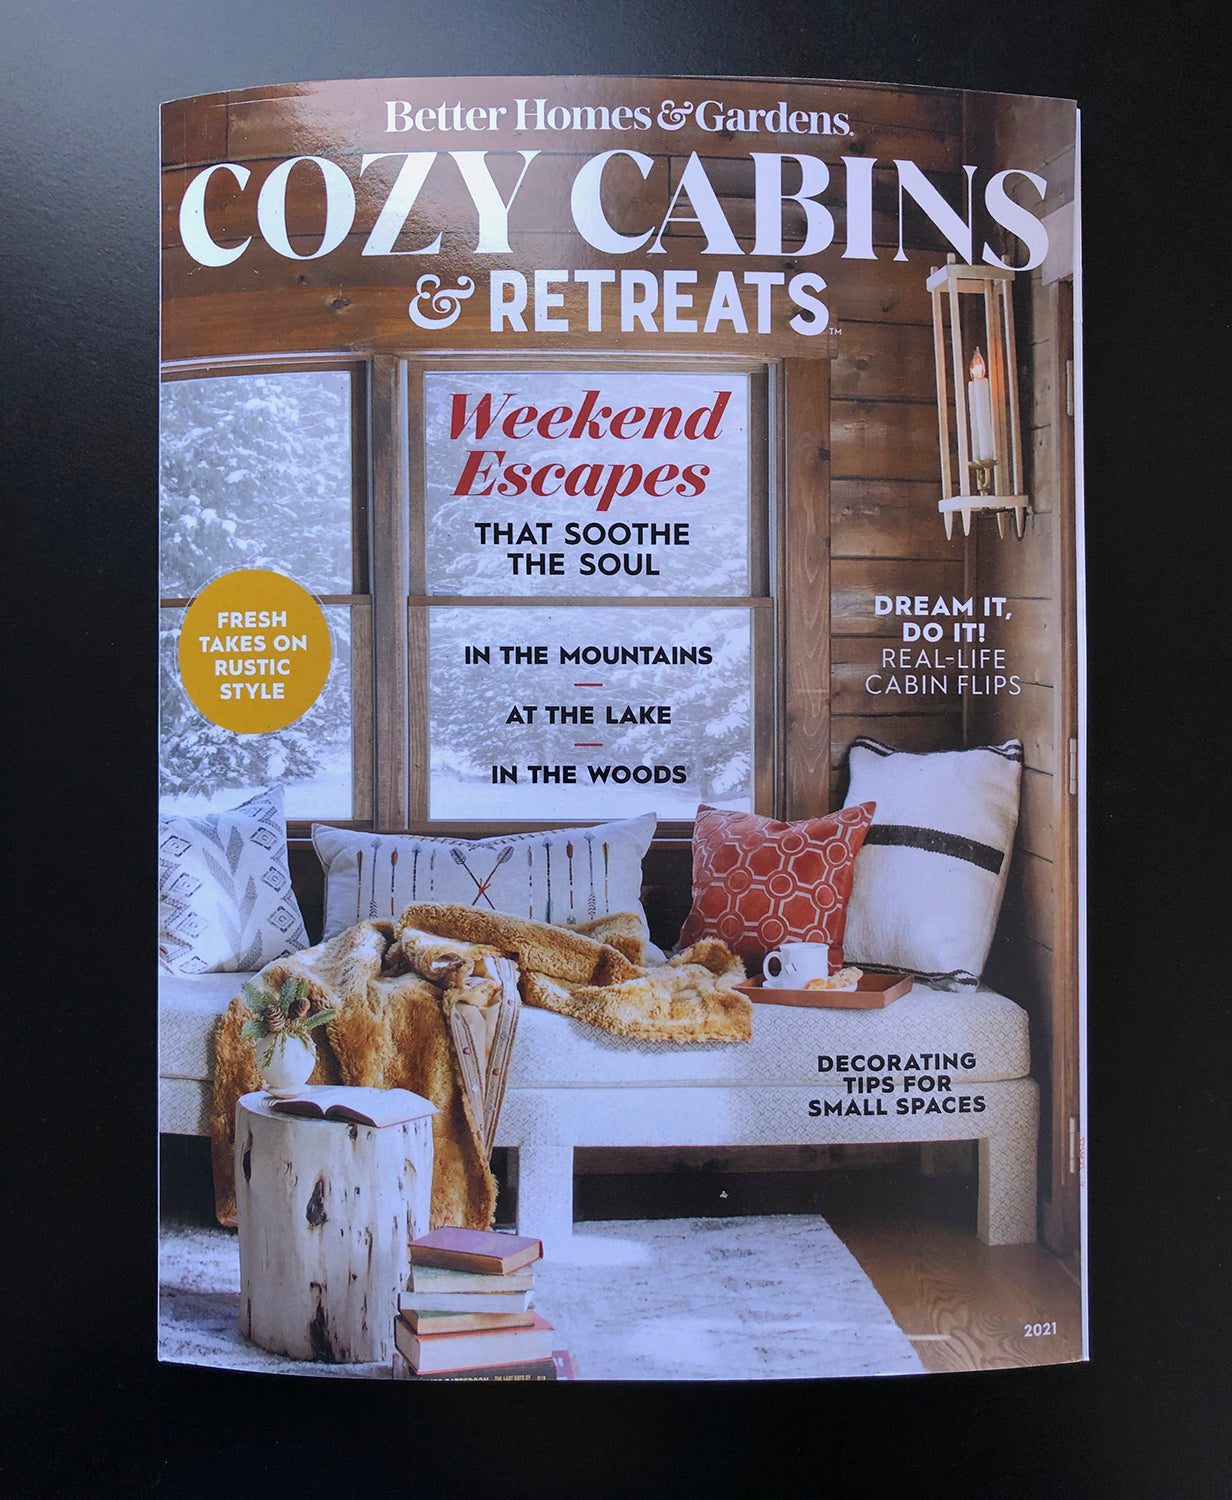 Cover of Cozy Cabins & Retreats, a special publication of Better Homes & Gardens where photographs by Keith Dotson can be seen